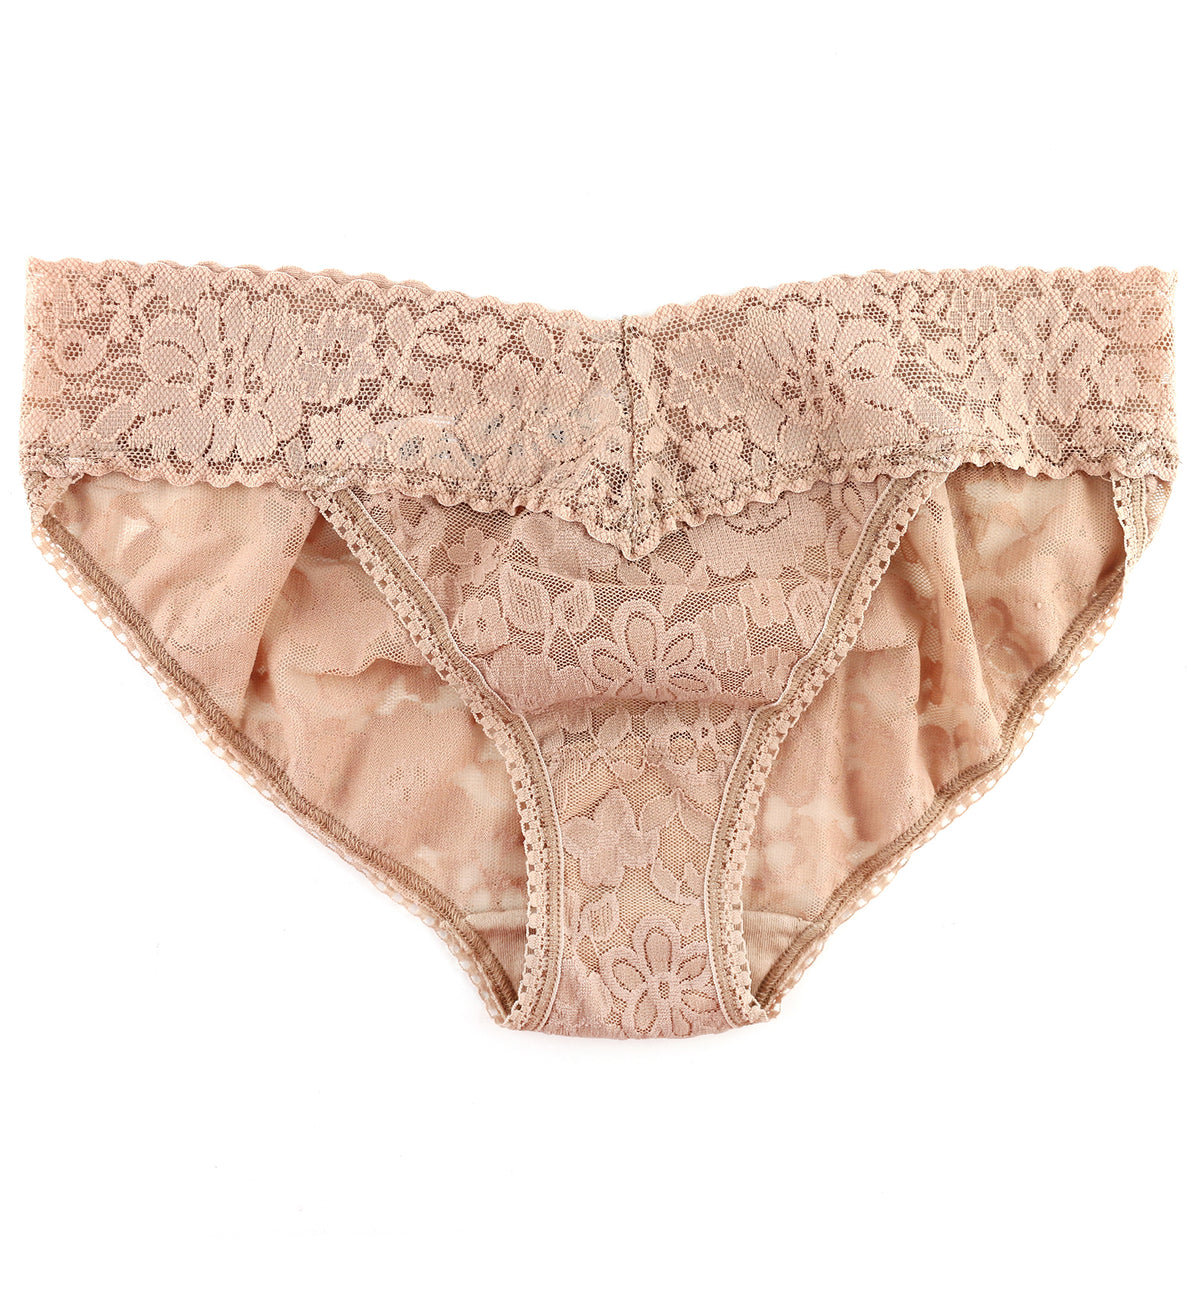 Hanky Panky Daily Lace V-kini (772371P),XS,Taupe - Taupe,XS